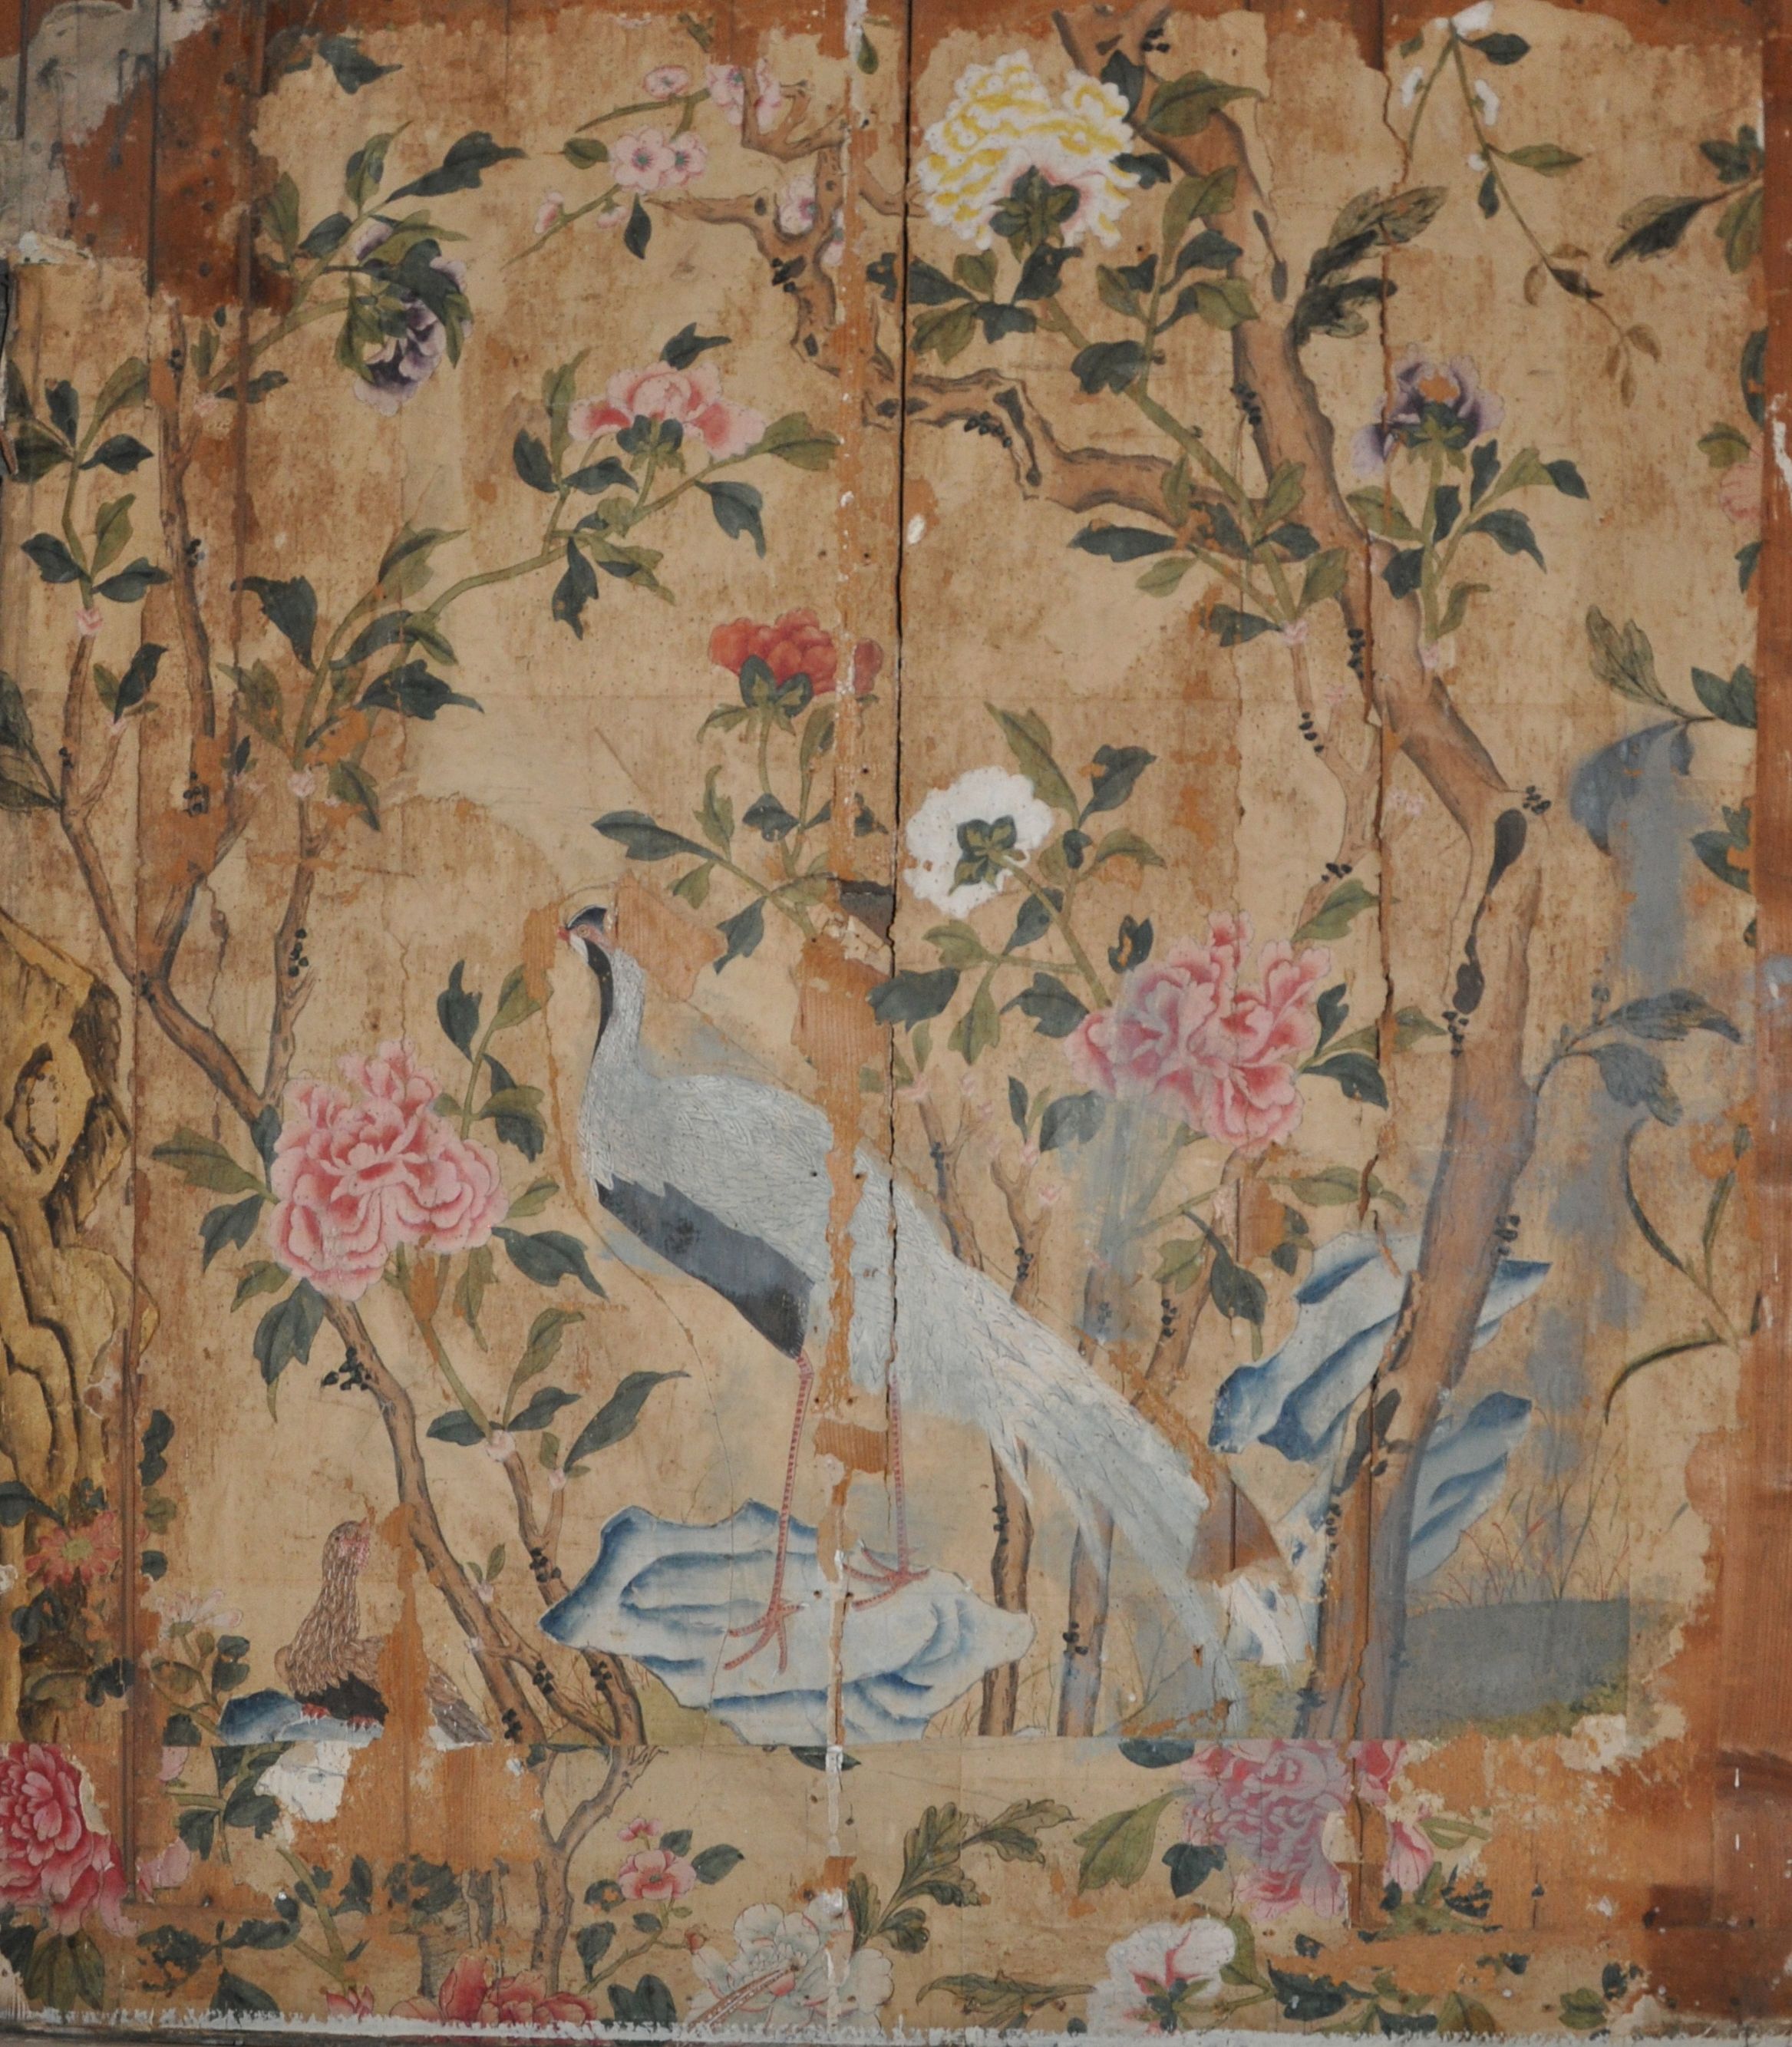 The History Blog Blog Archive 18th c. Chinese wallpaper found